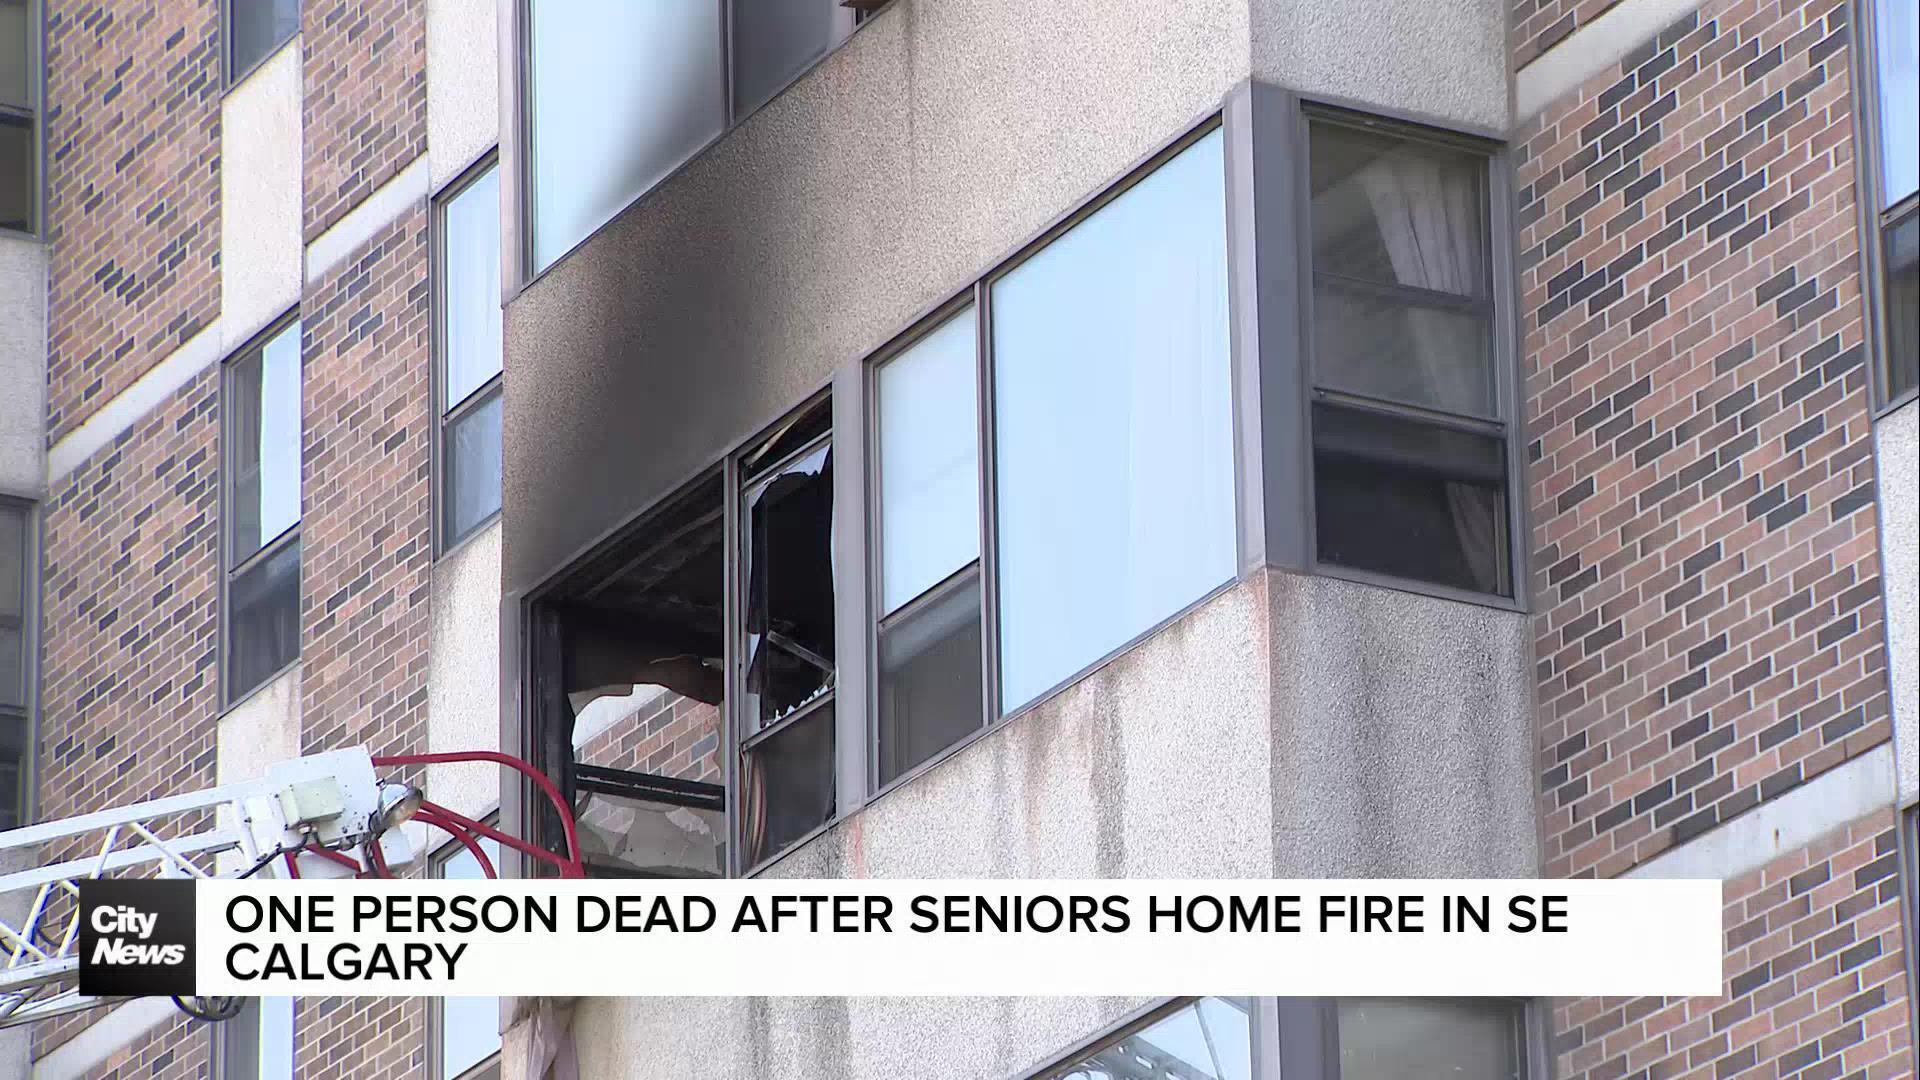 One person dead after seniors home fire in SE Calgary